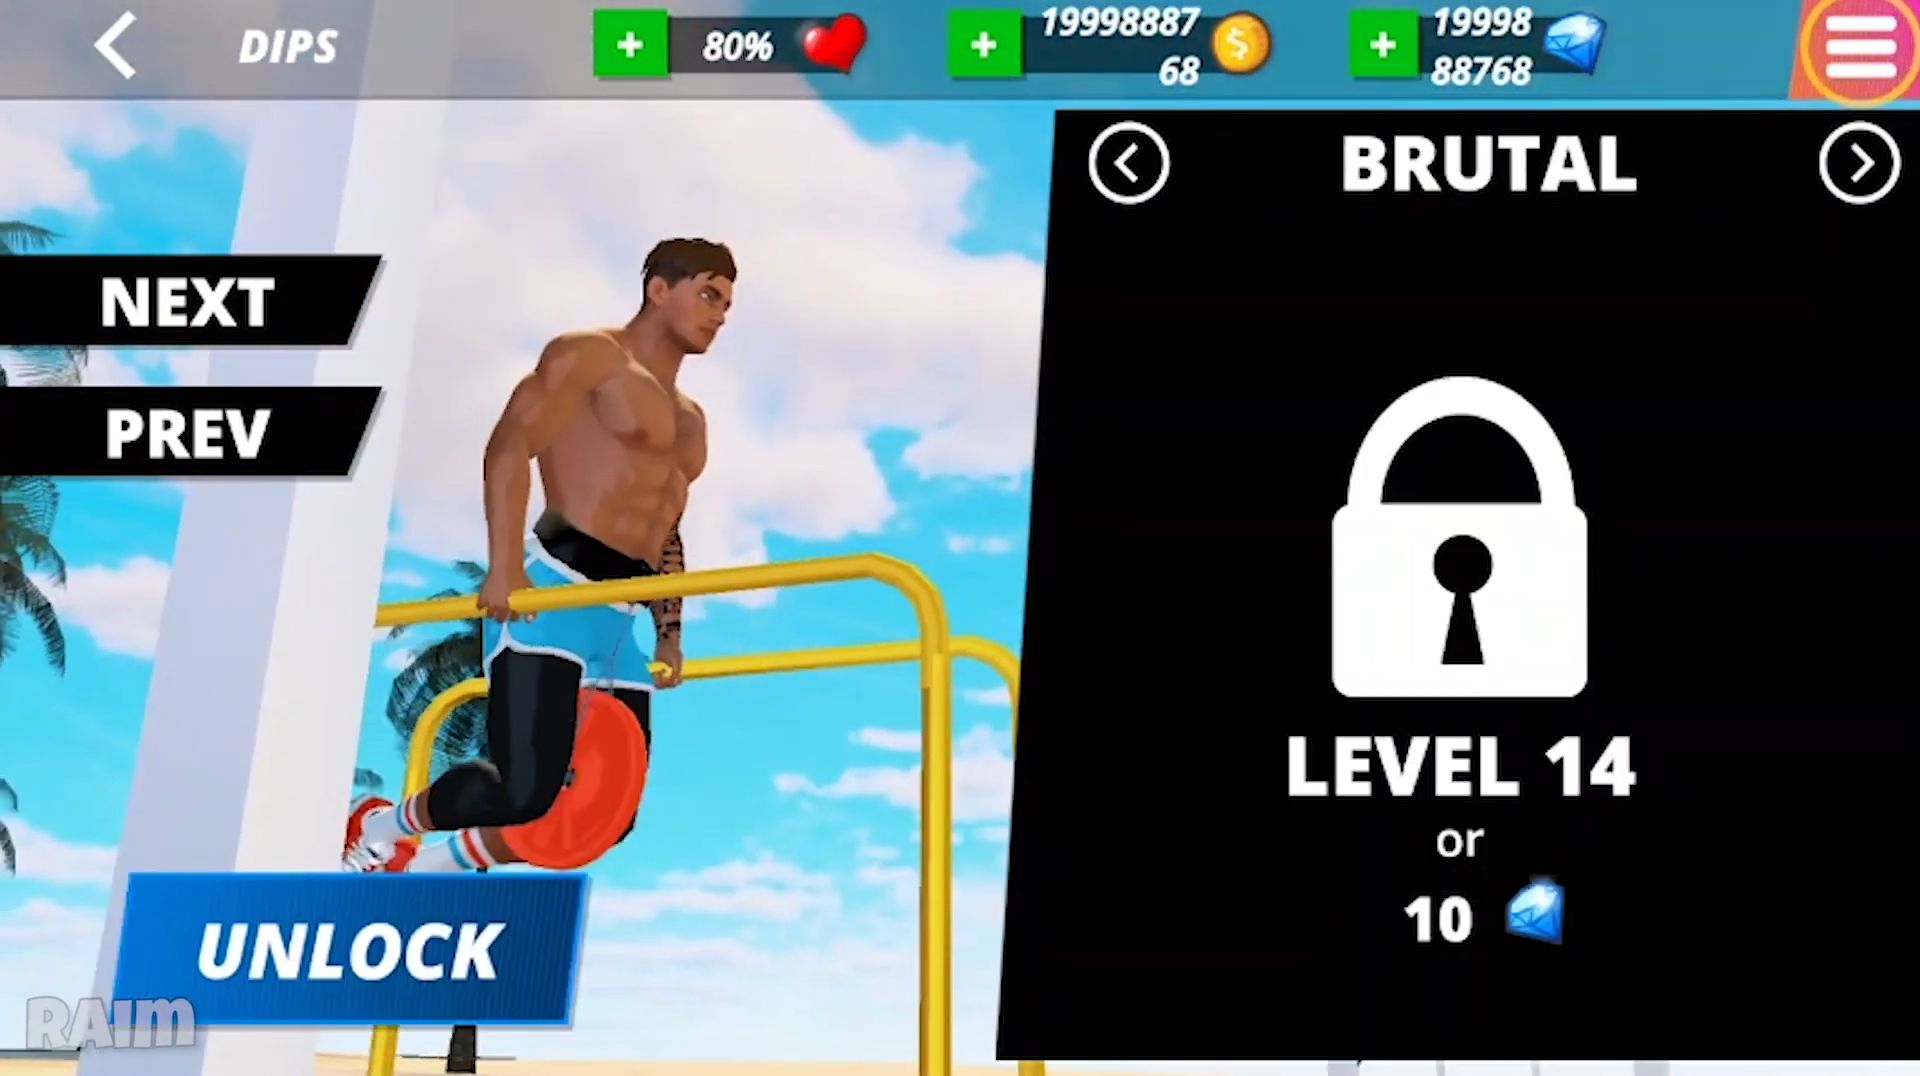 Iron Muscle - Be the champion /Bodybulding Workout for Android